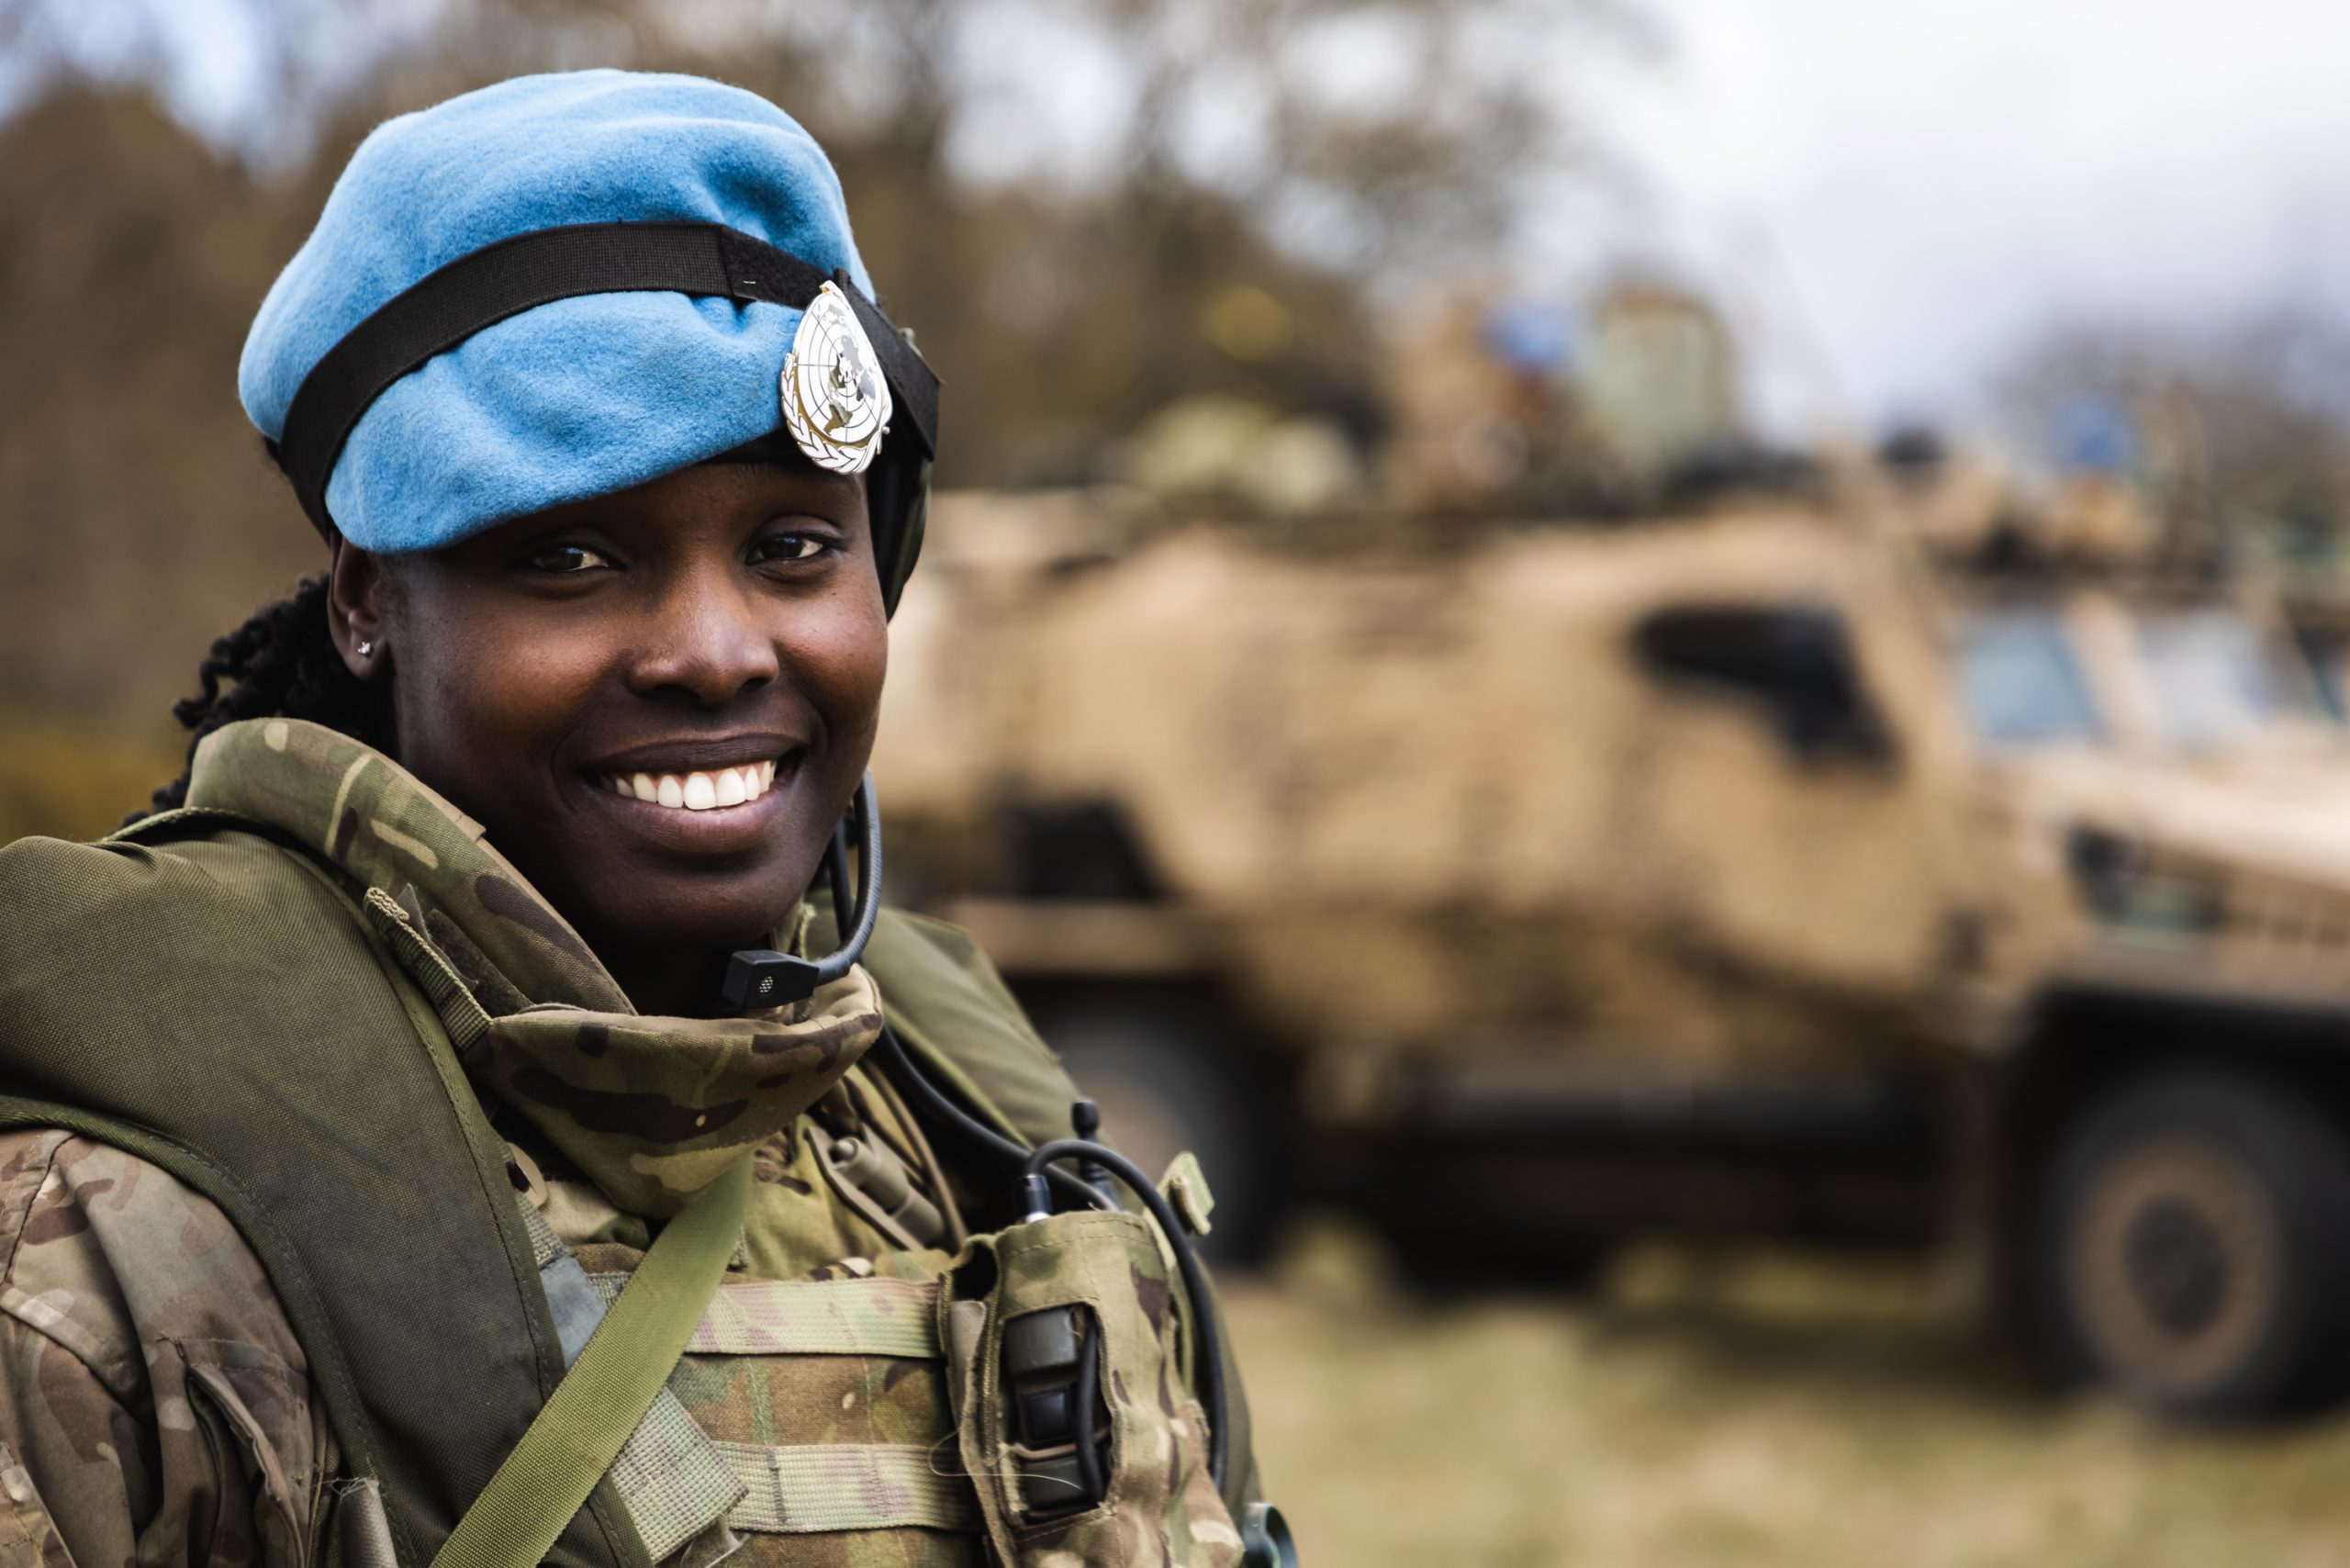 The International Day of UN Peacekeepers 2021